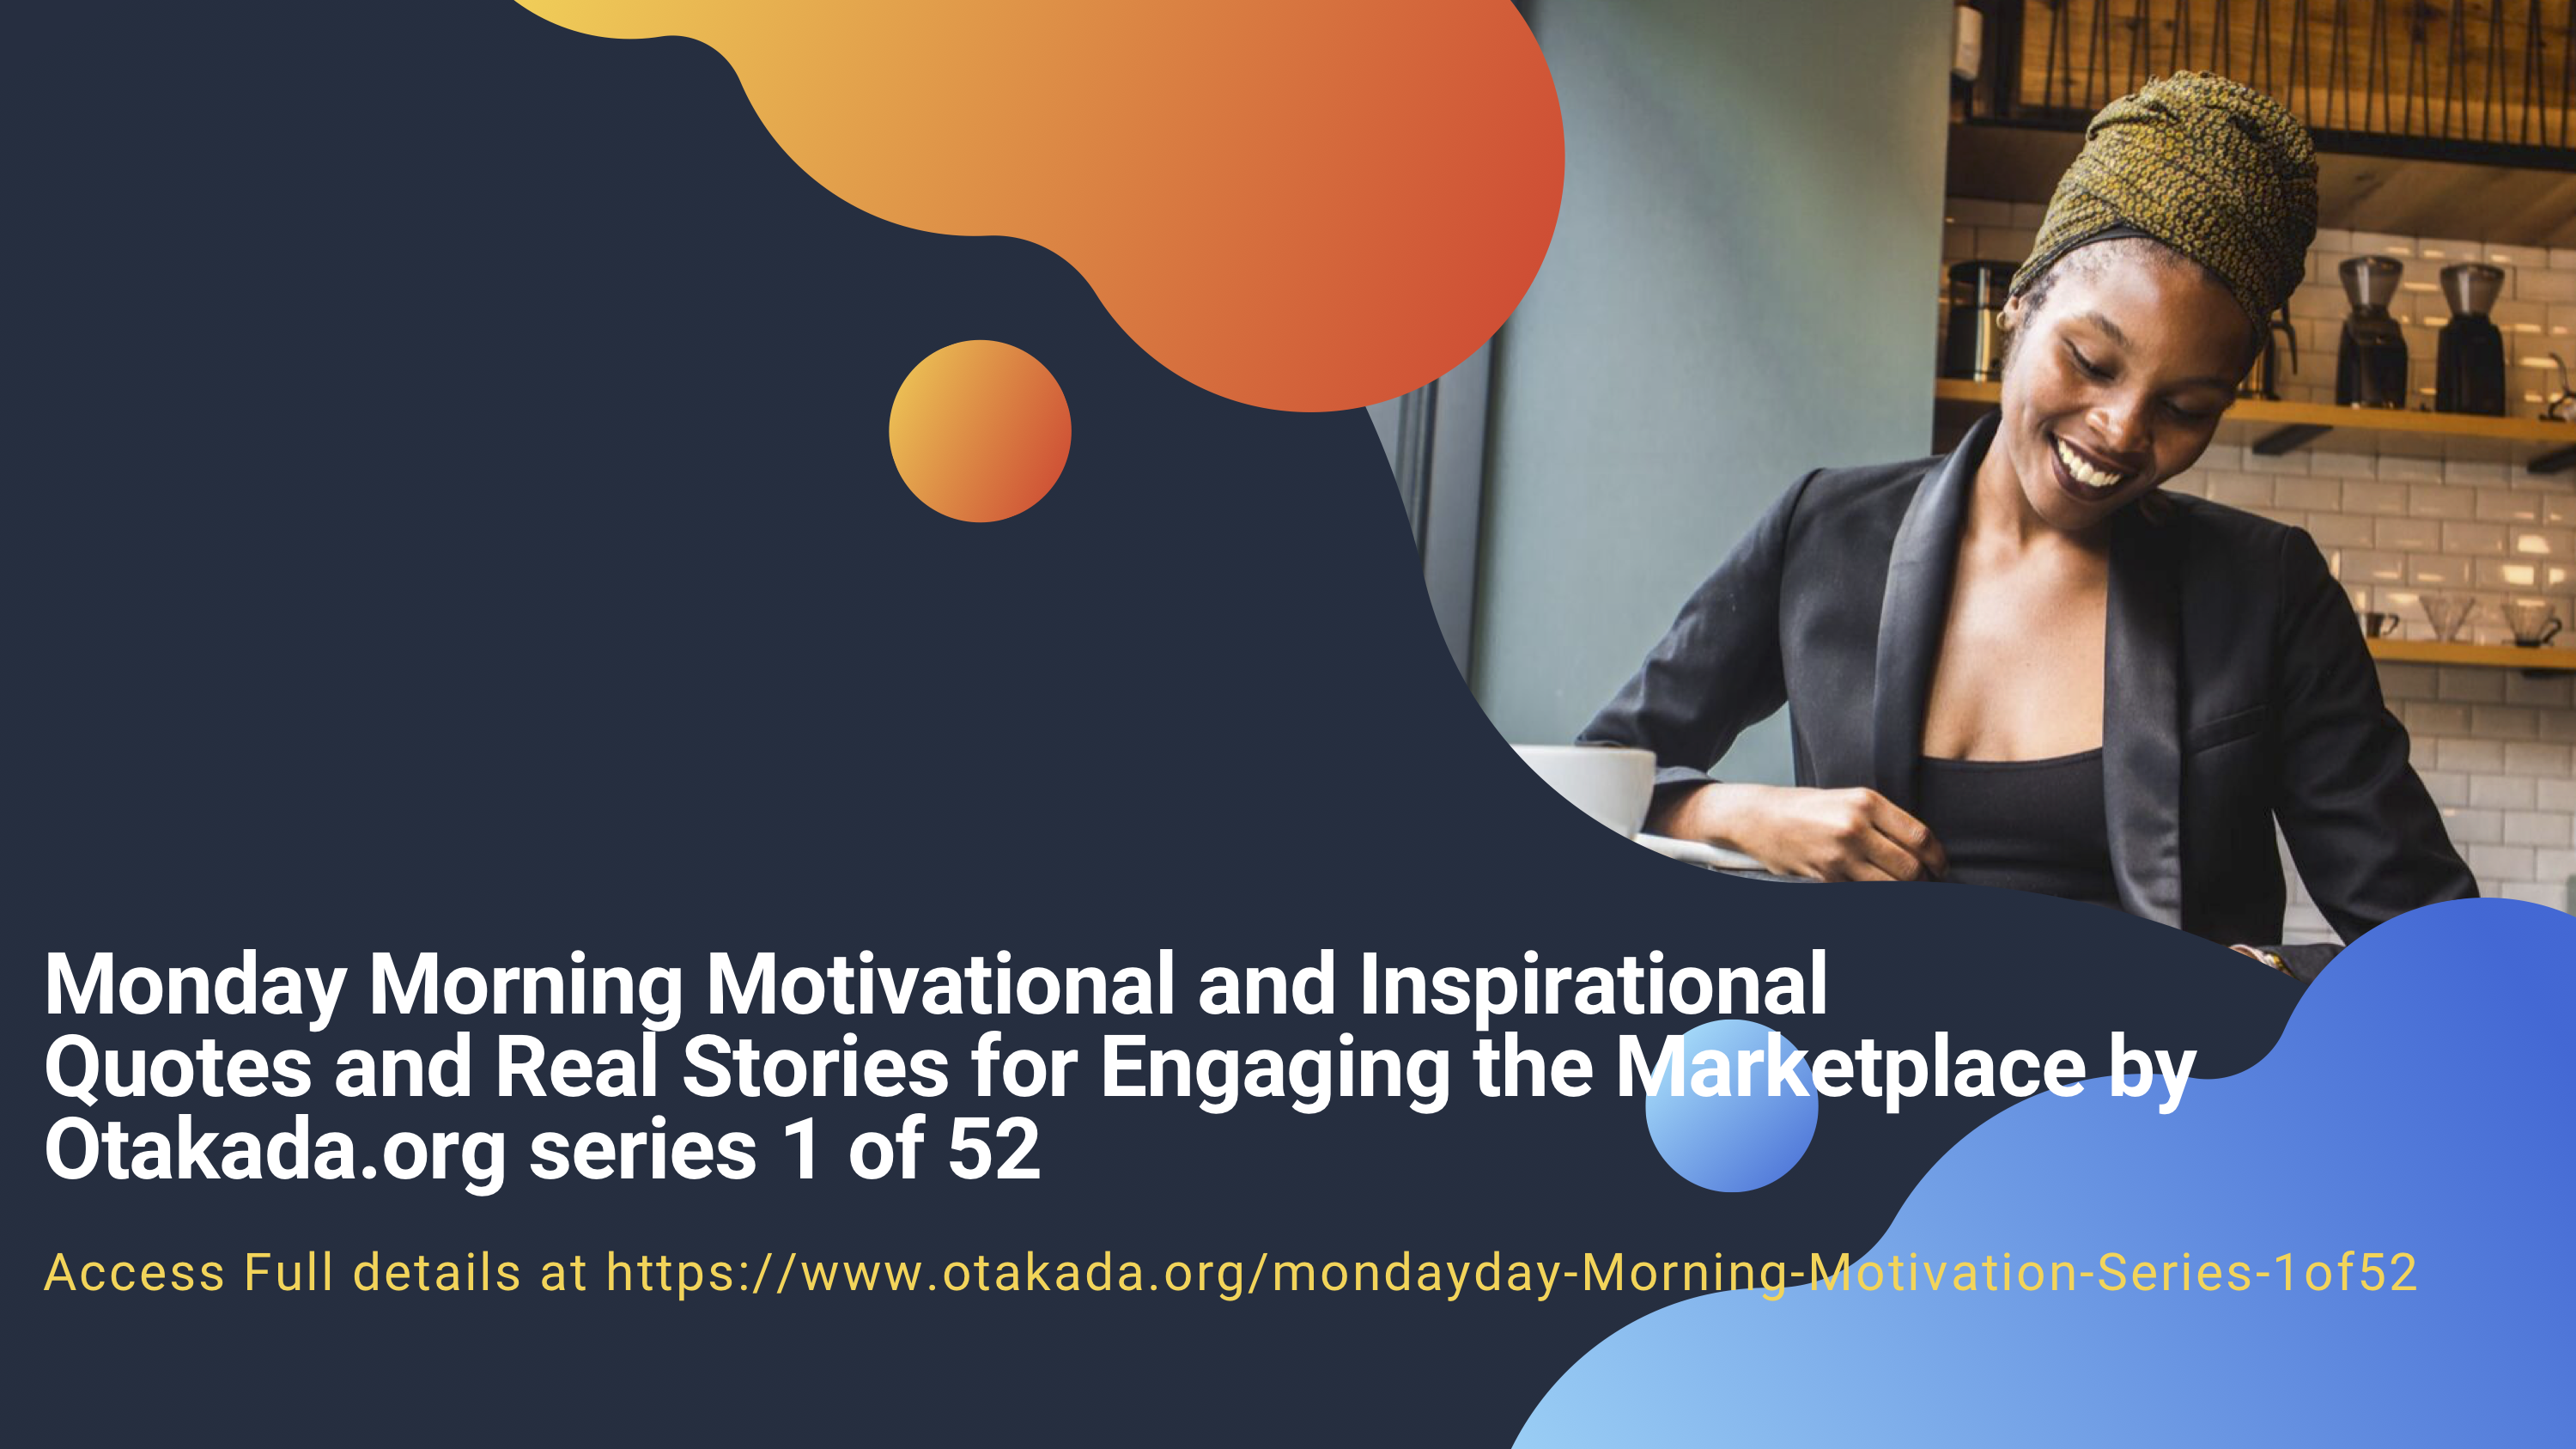 Monday Morning Motivational and Inspirational Quotes and Real Stories for Engaging the Marketplace by Otakada.org series 1 of 52